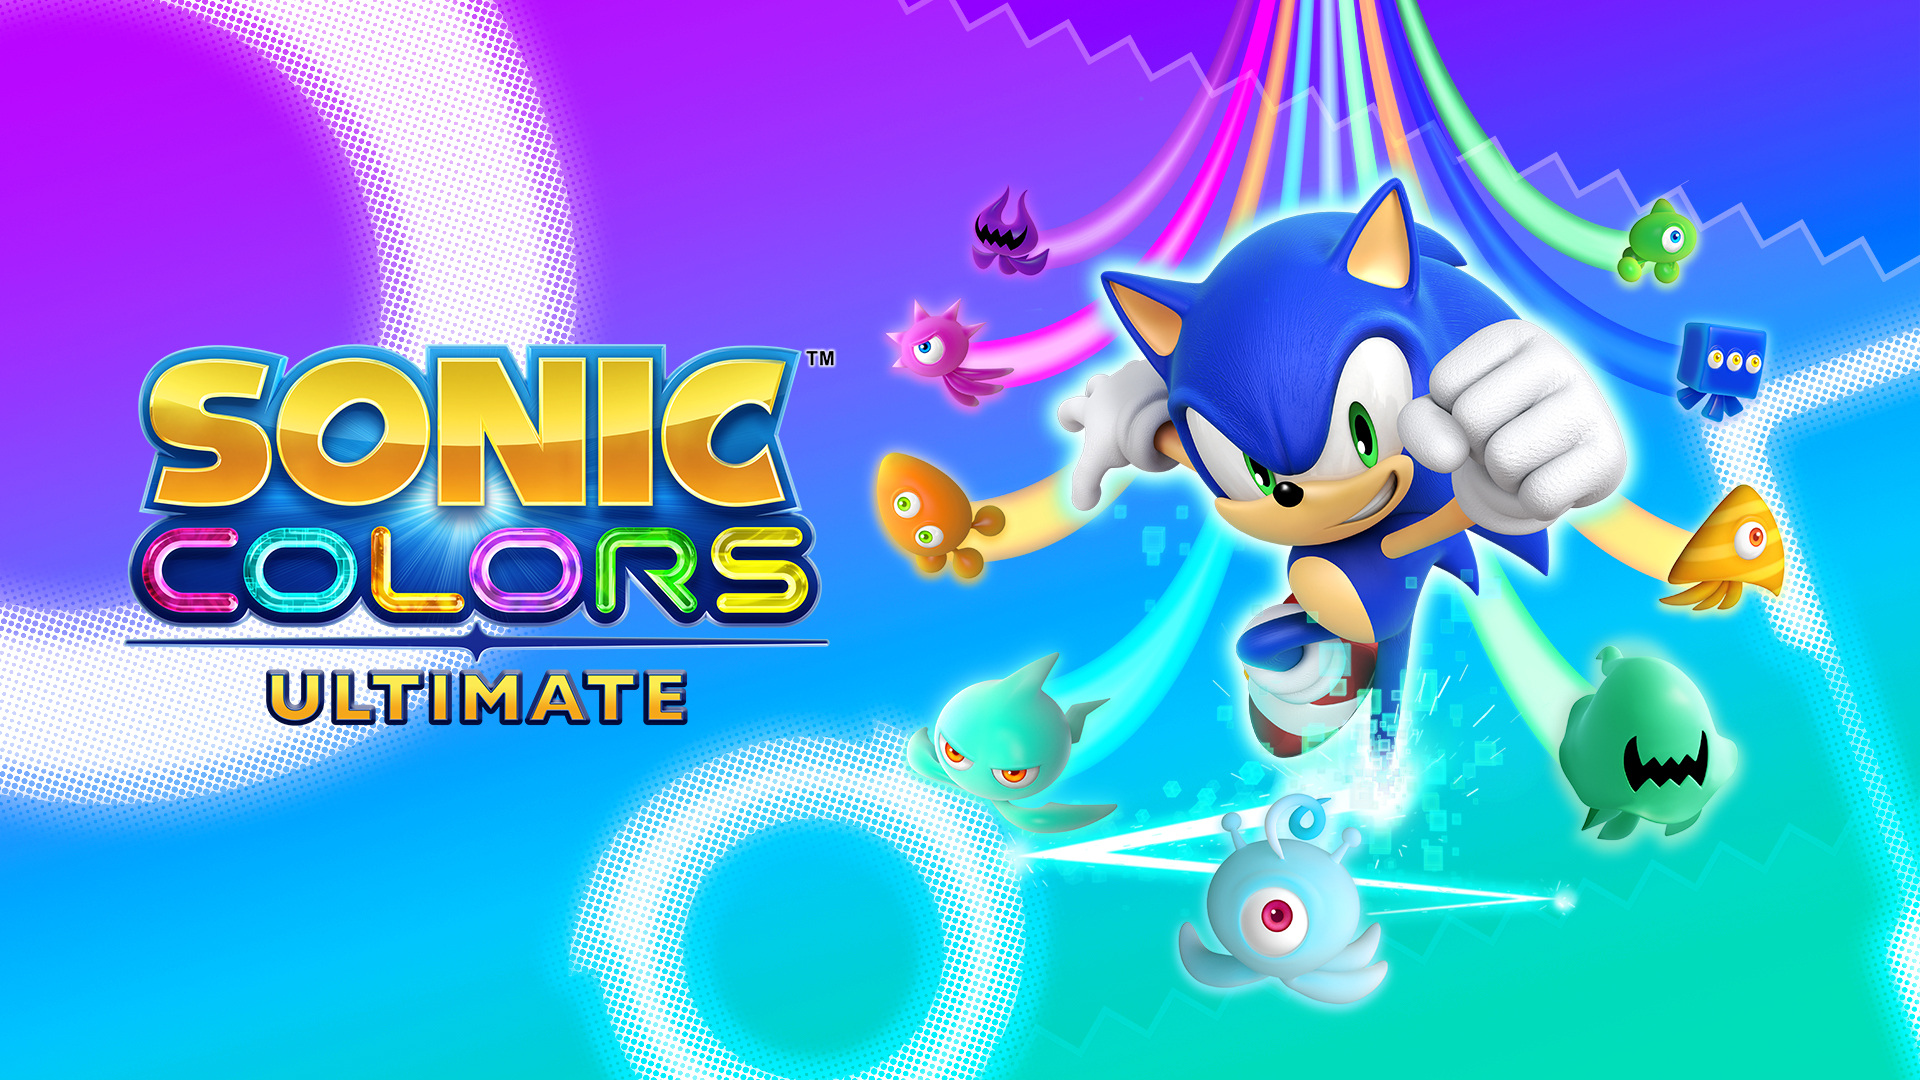 sonic colors: ultimate, video game, logo, sonic the hedgehog